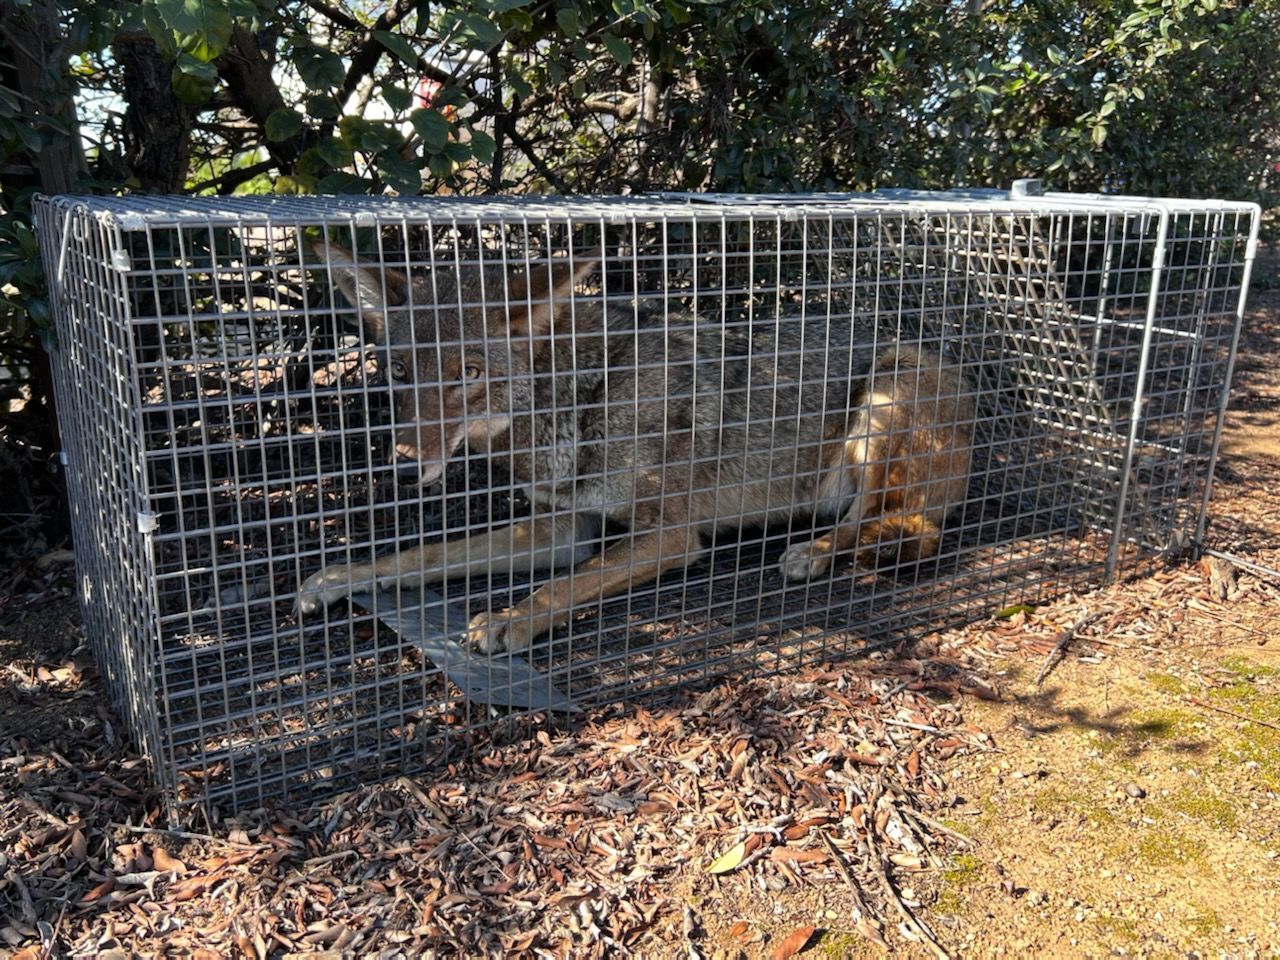 A coyote is laying in a wire cage.